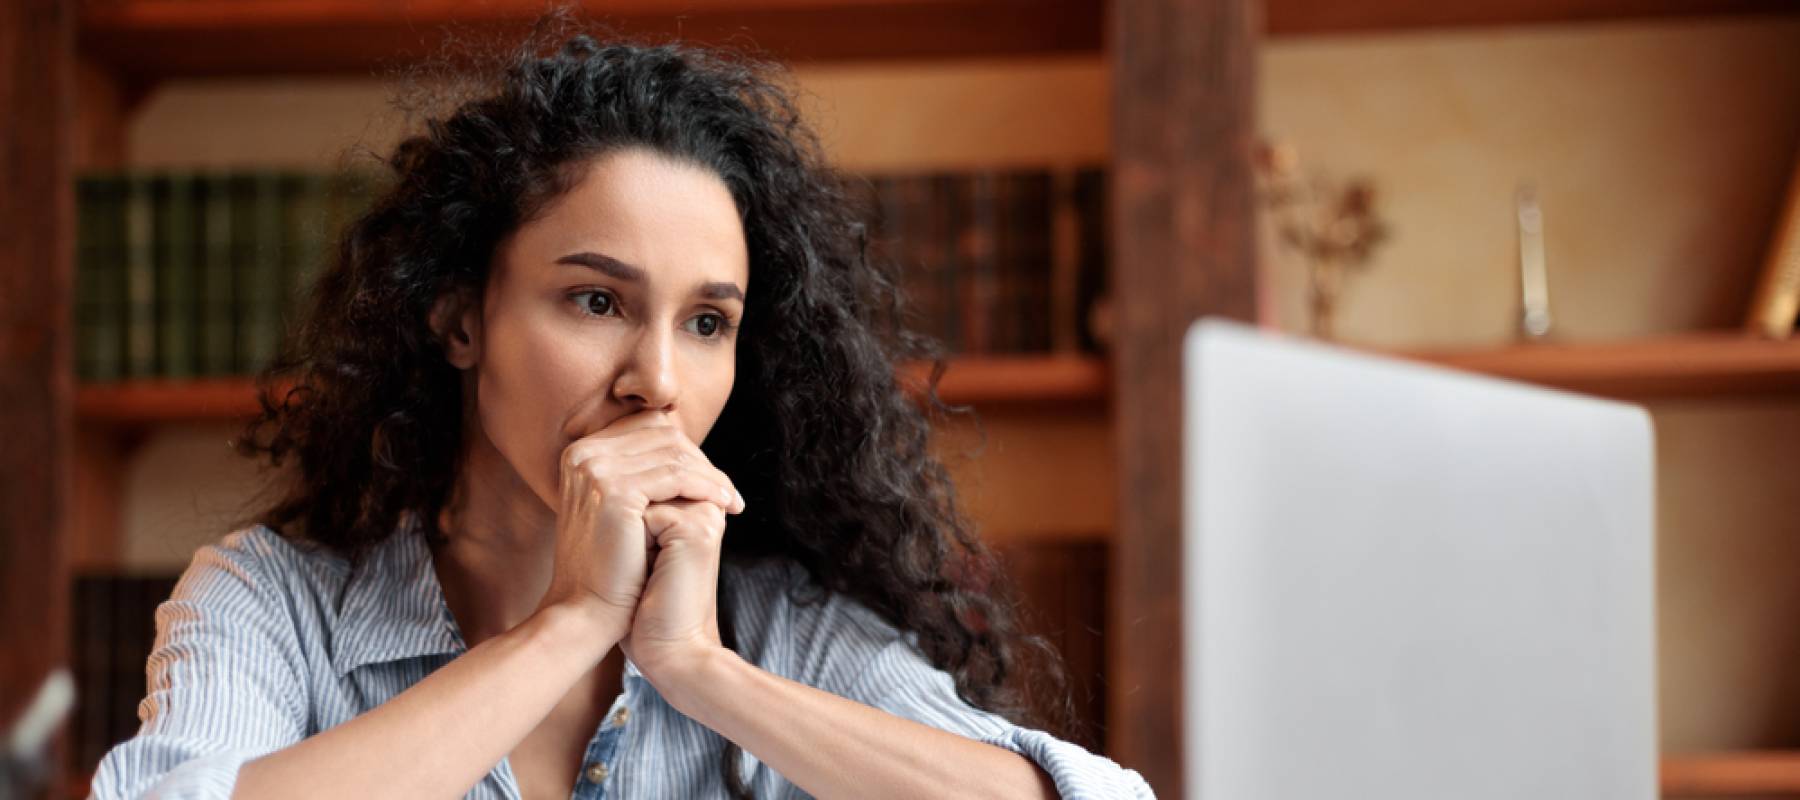 Woman looks at her computer with hands clasped on her chin, looking concerned.